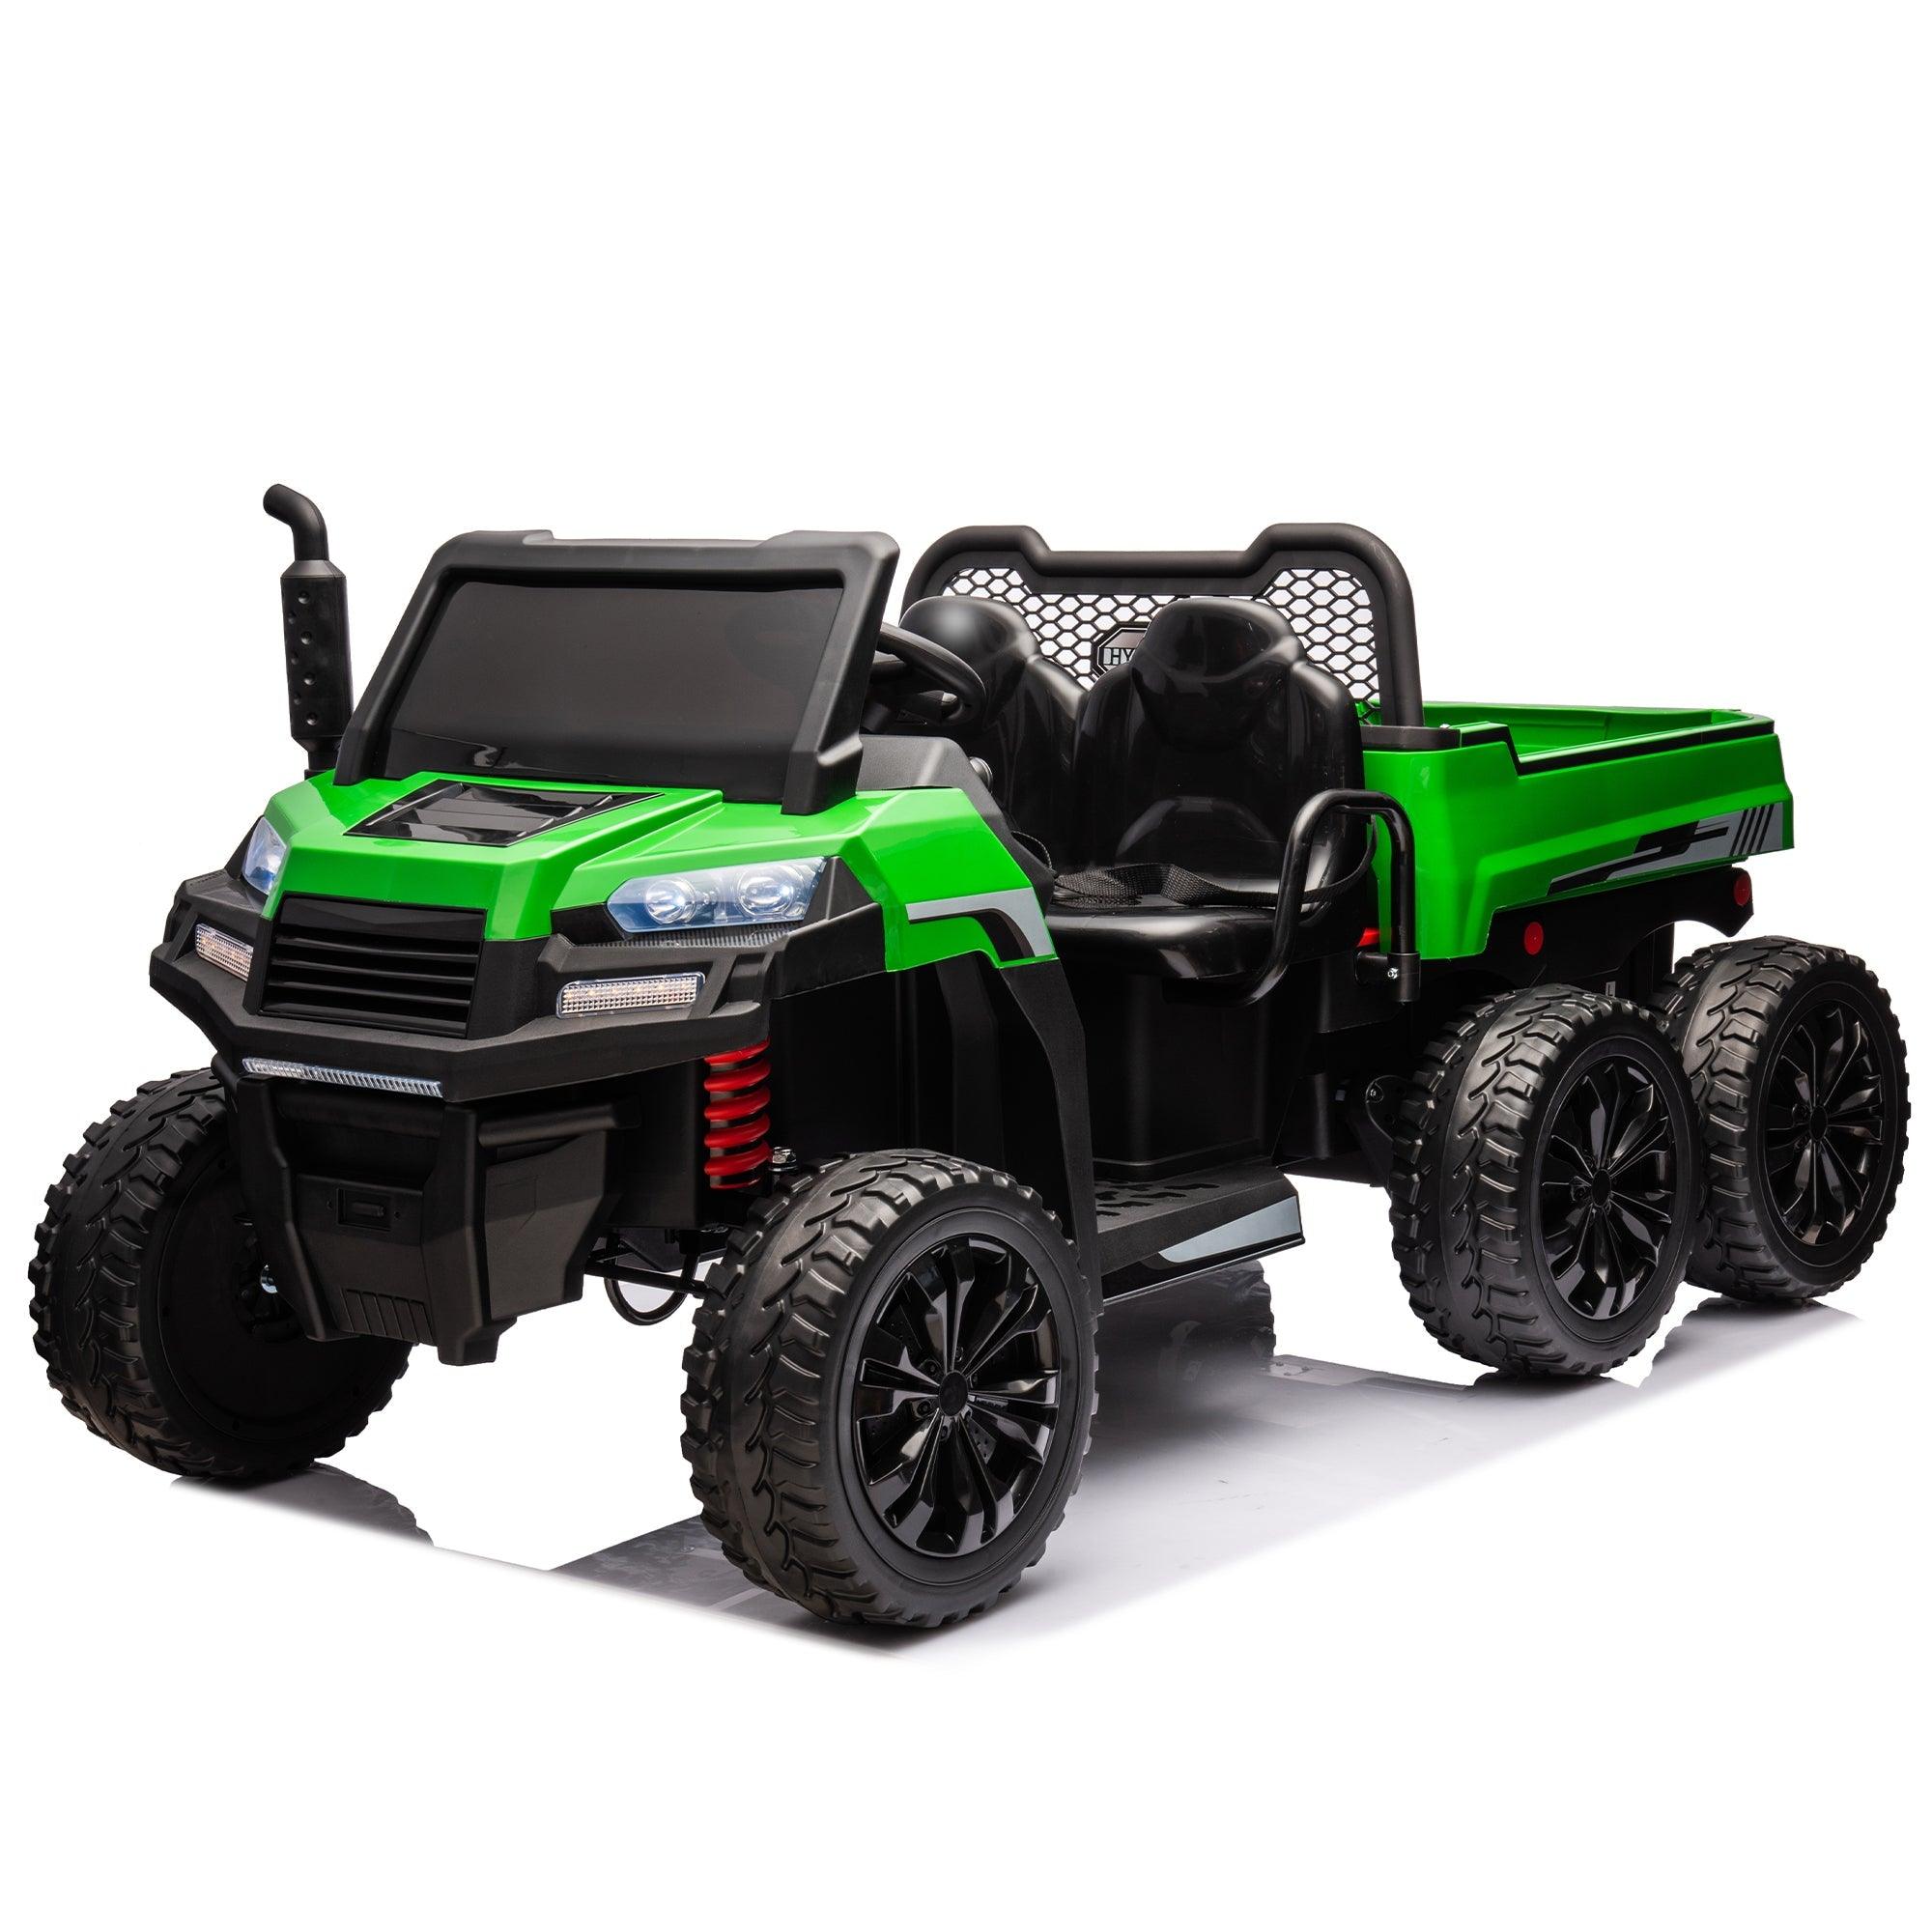 24V 2-Seater UTV-XXL Ride On Truck with Dump Bed for kid, Ride On 4WD UTV with 6 Wheels, Foam Tires, Suitable for Off-Roading, Remote control, Three-Point Safety Harness LamCham